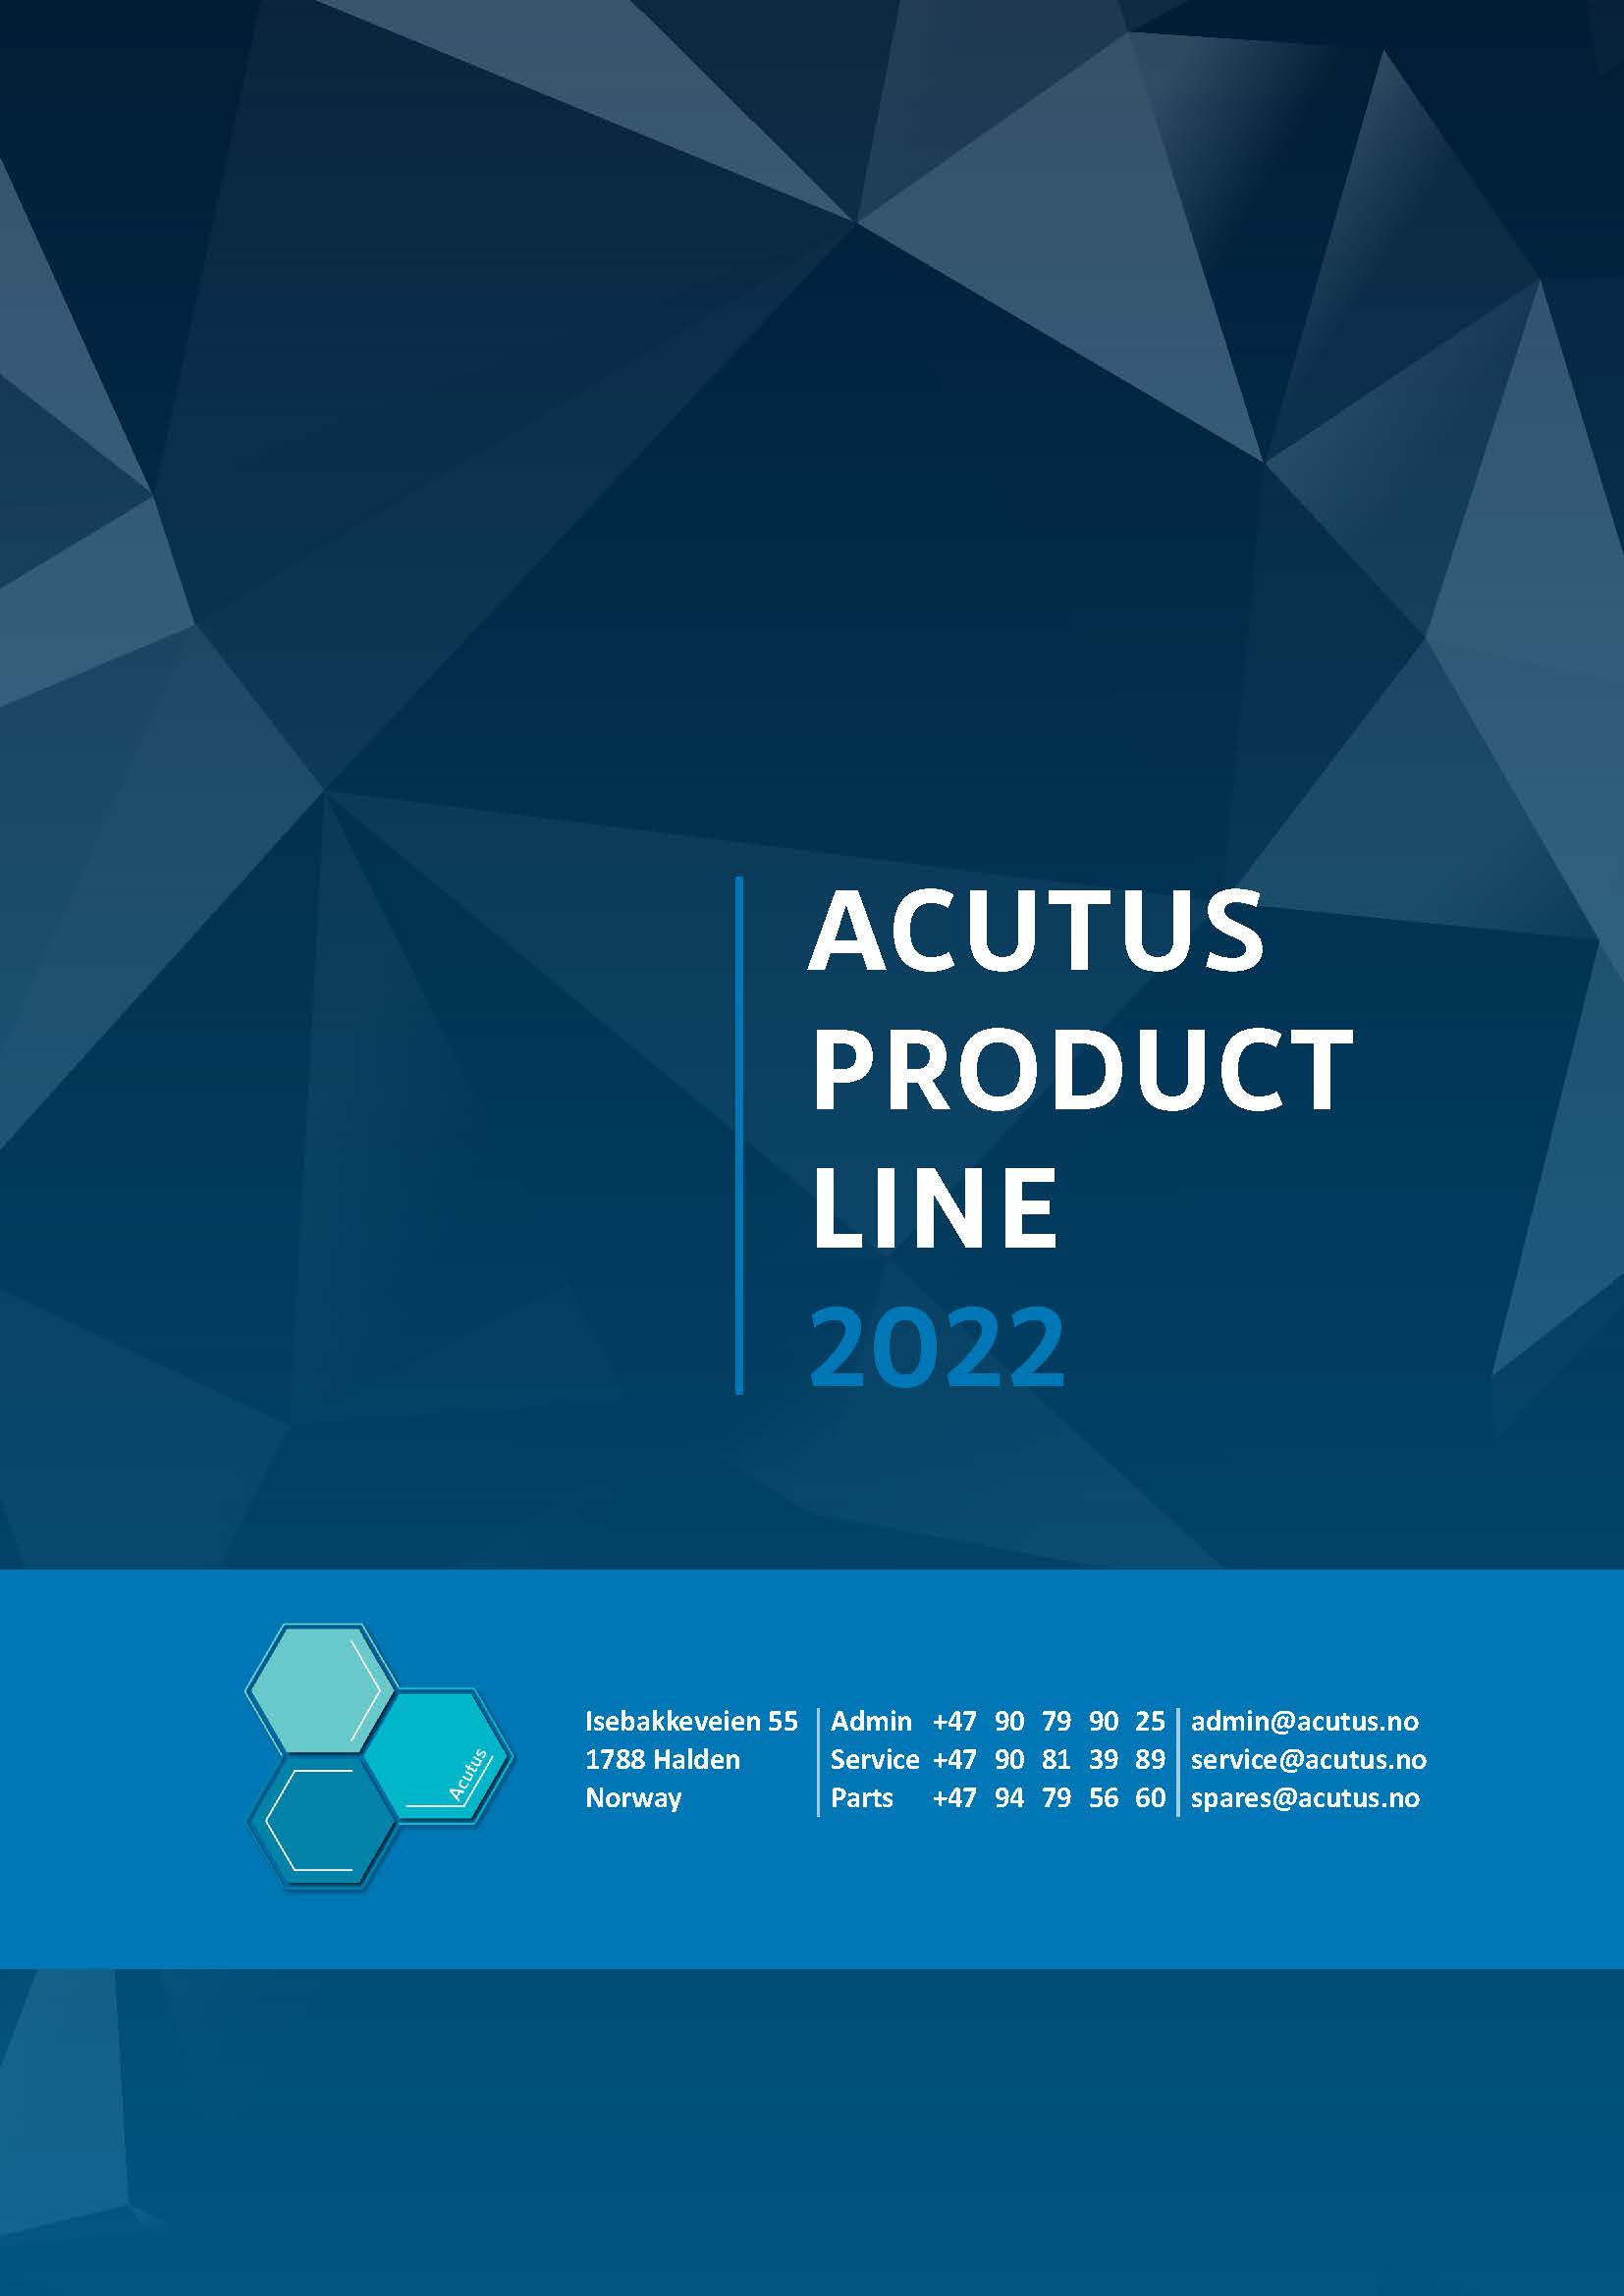 Acutus Product Line Download Material